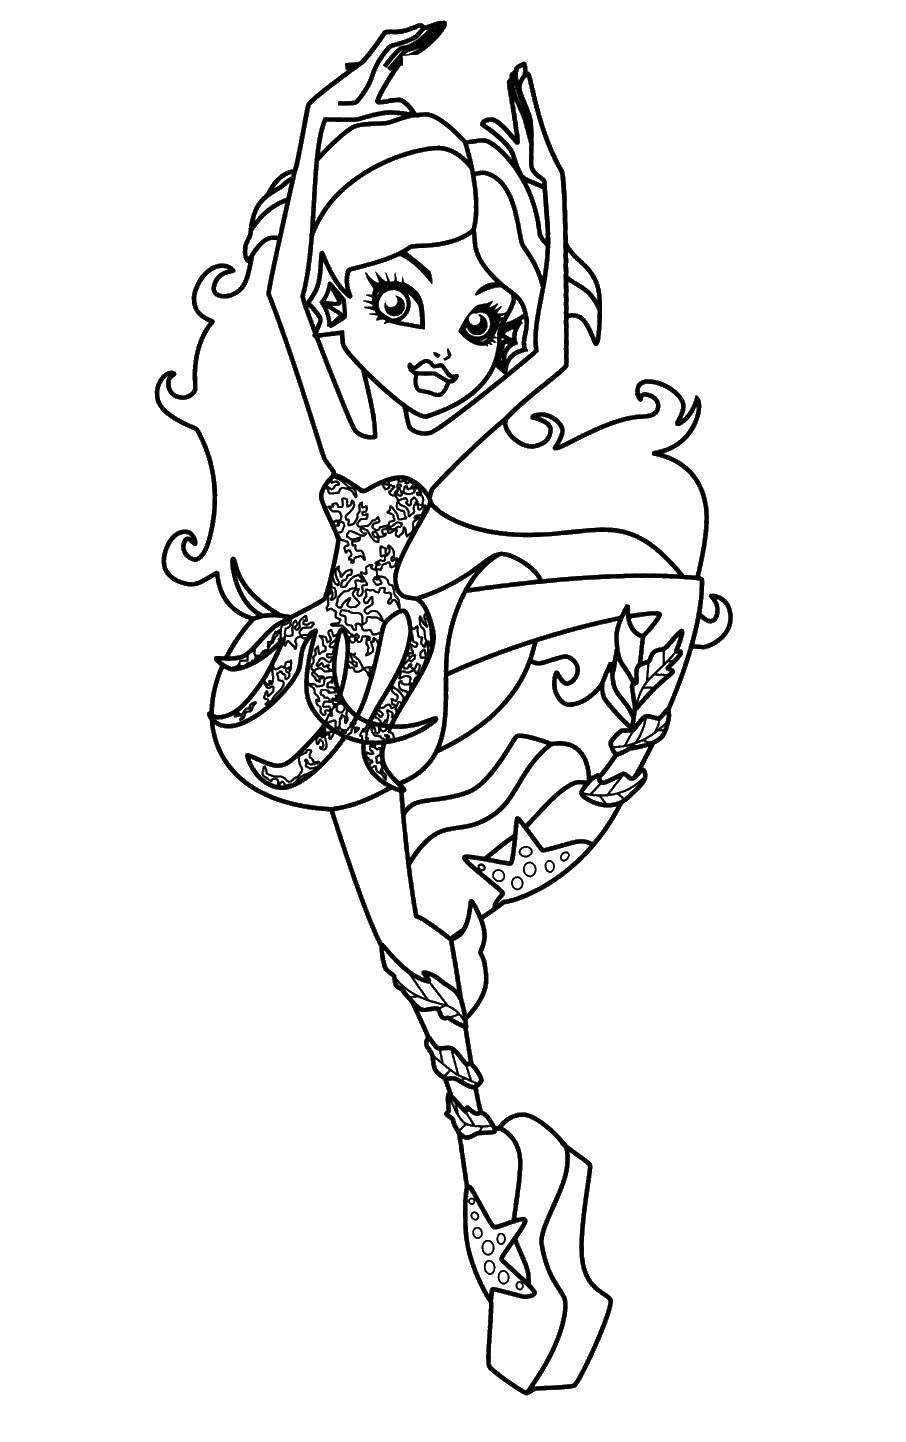 Coloring Dancing she-beast. Category monster high. Tags:  Monster High.